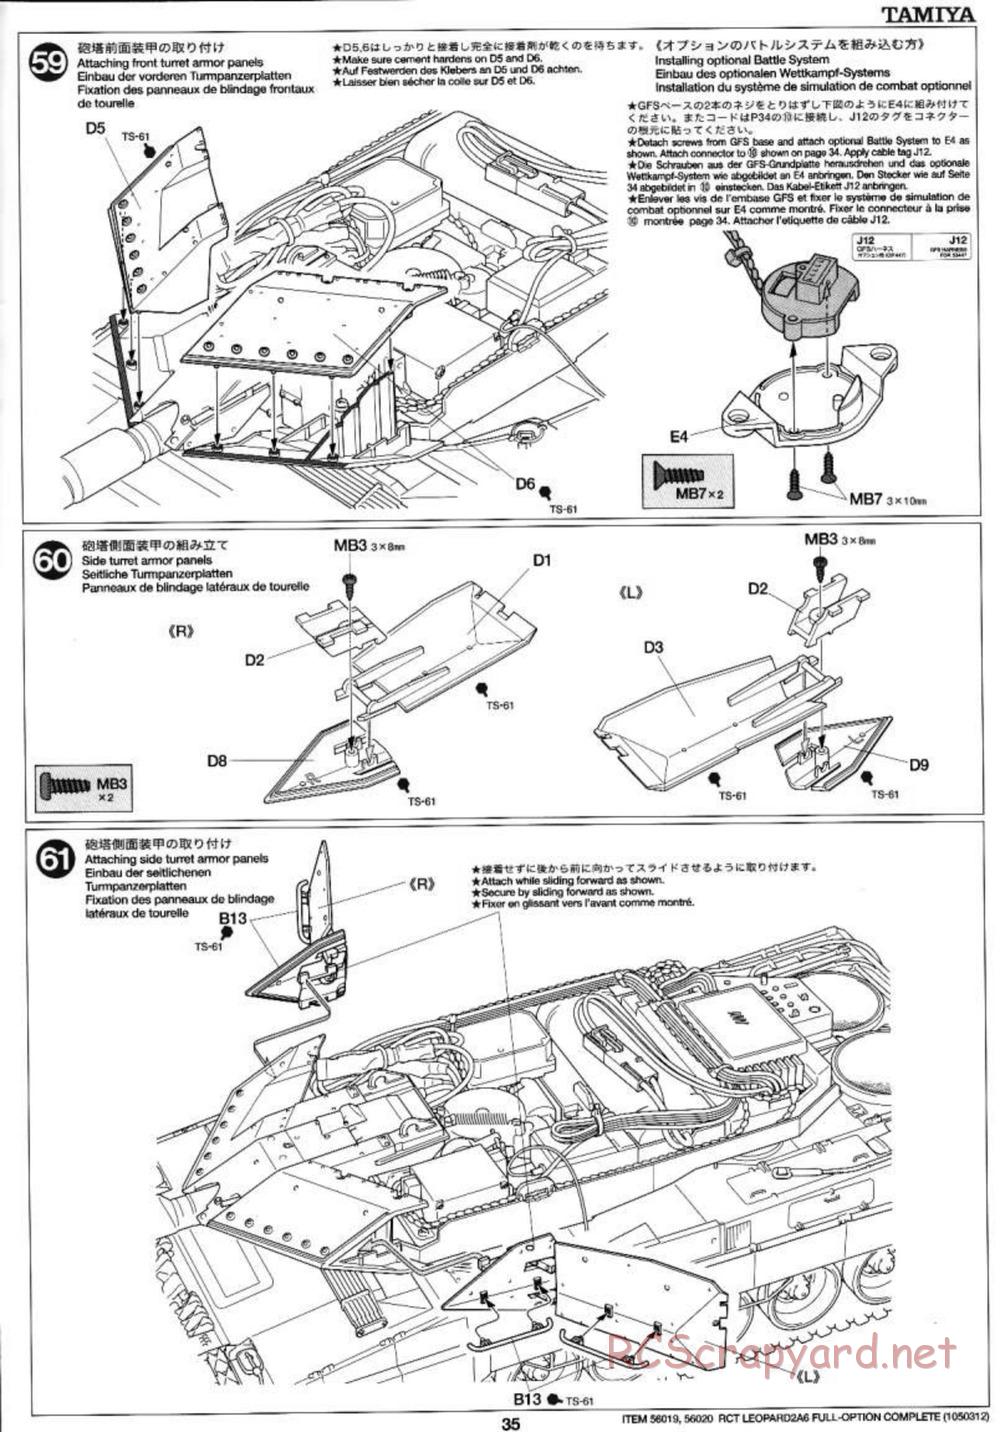 Tamiya - Leopard 2 A6 - 1/16 Scale Chassis - Manual - Page 35